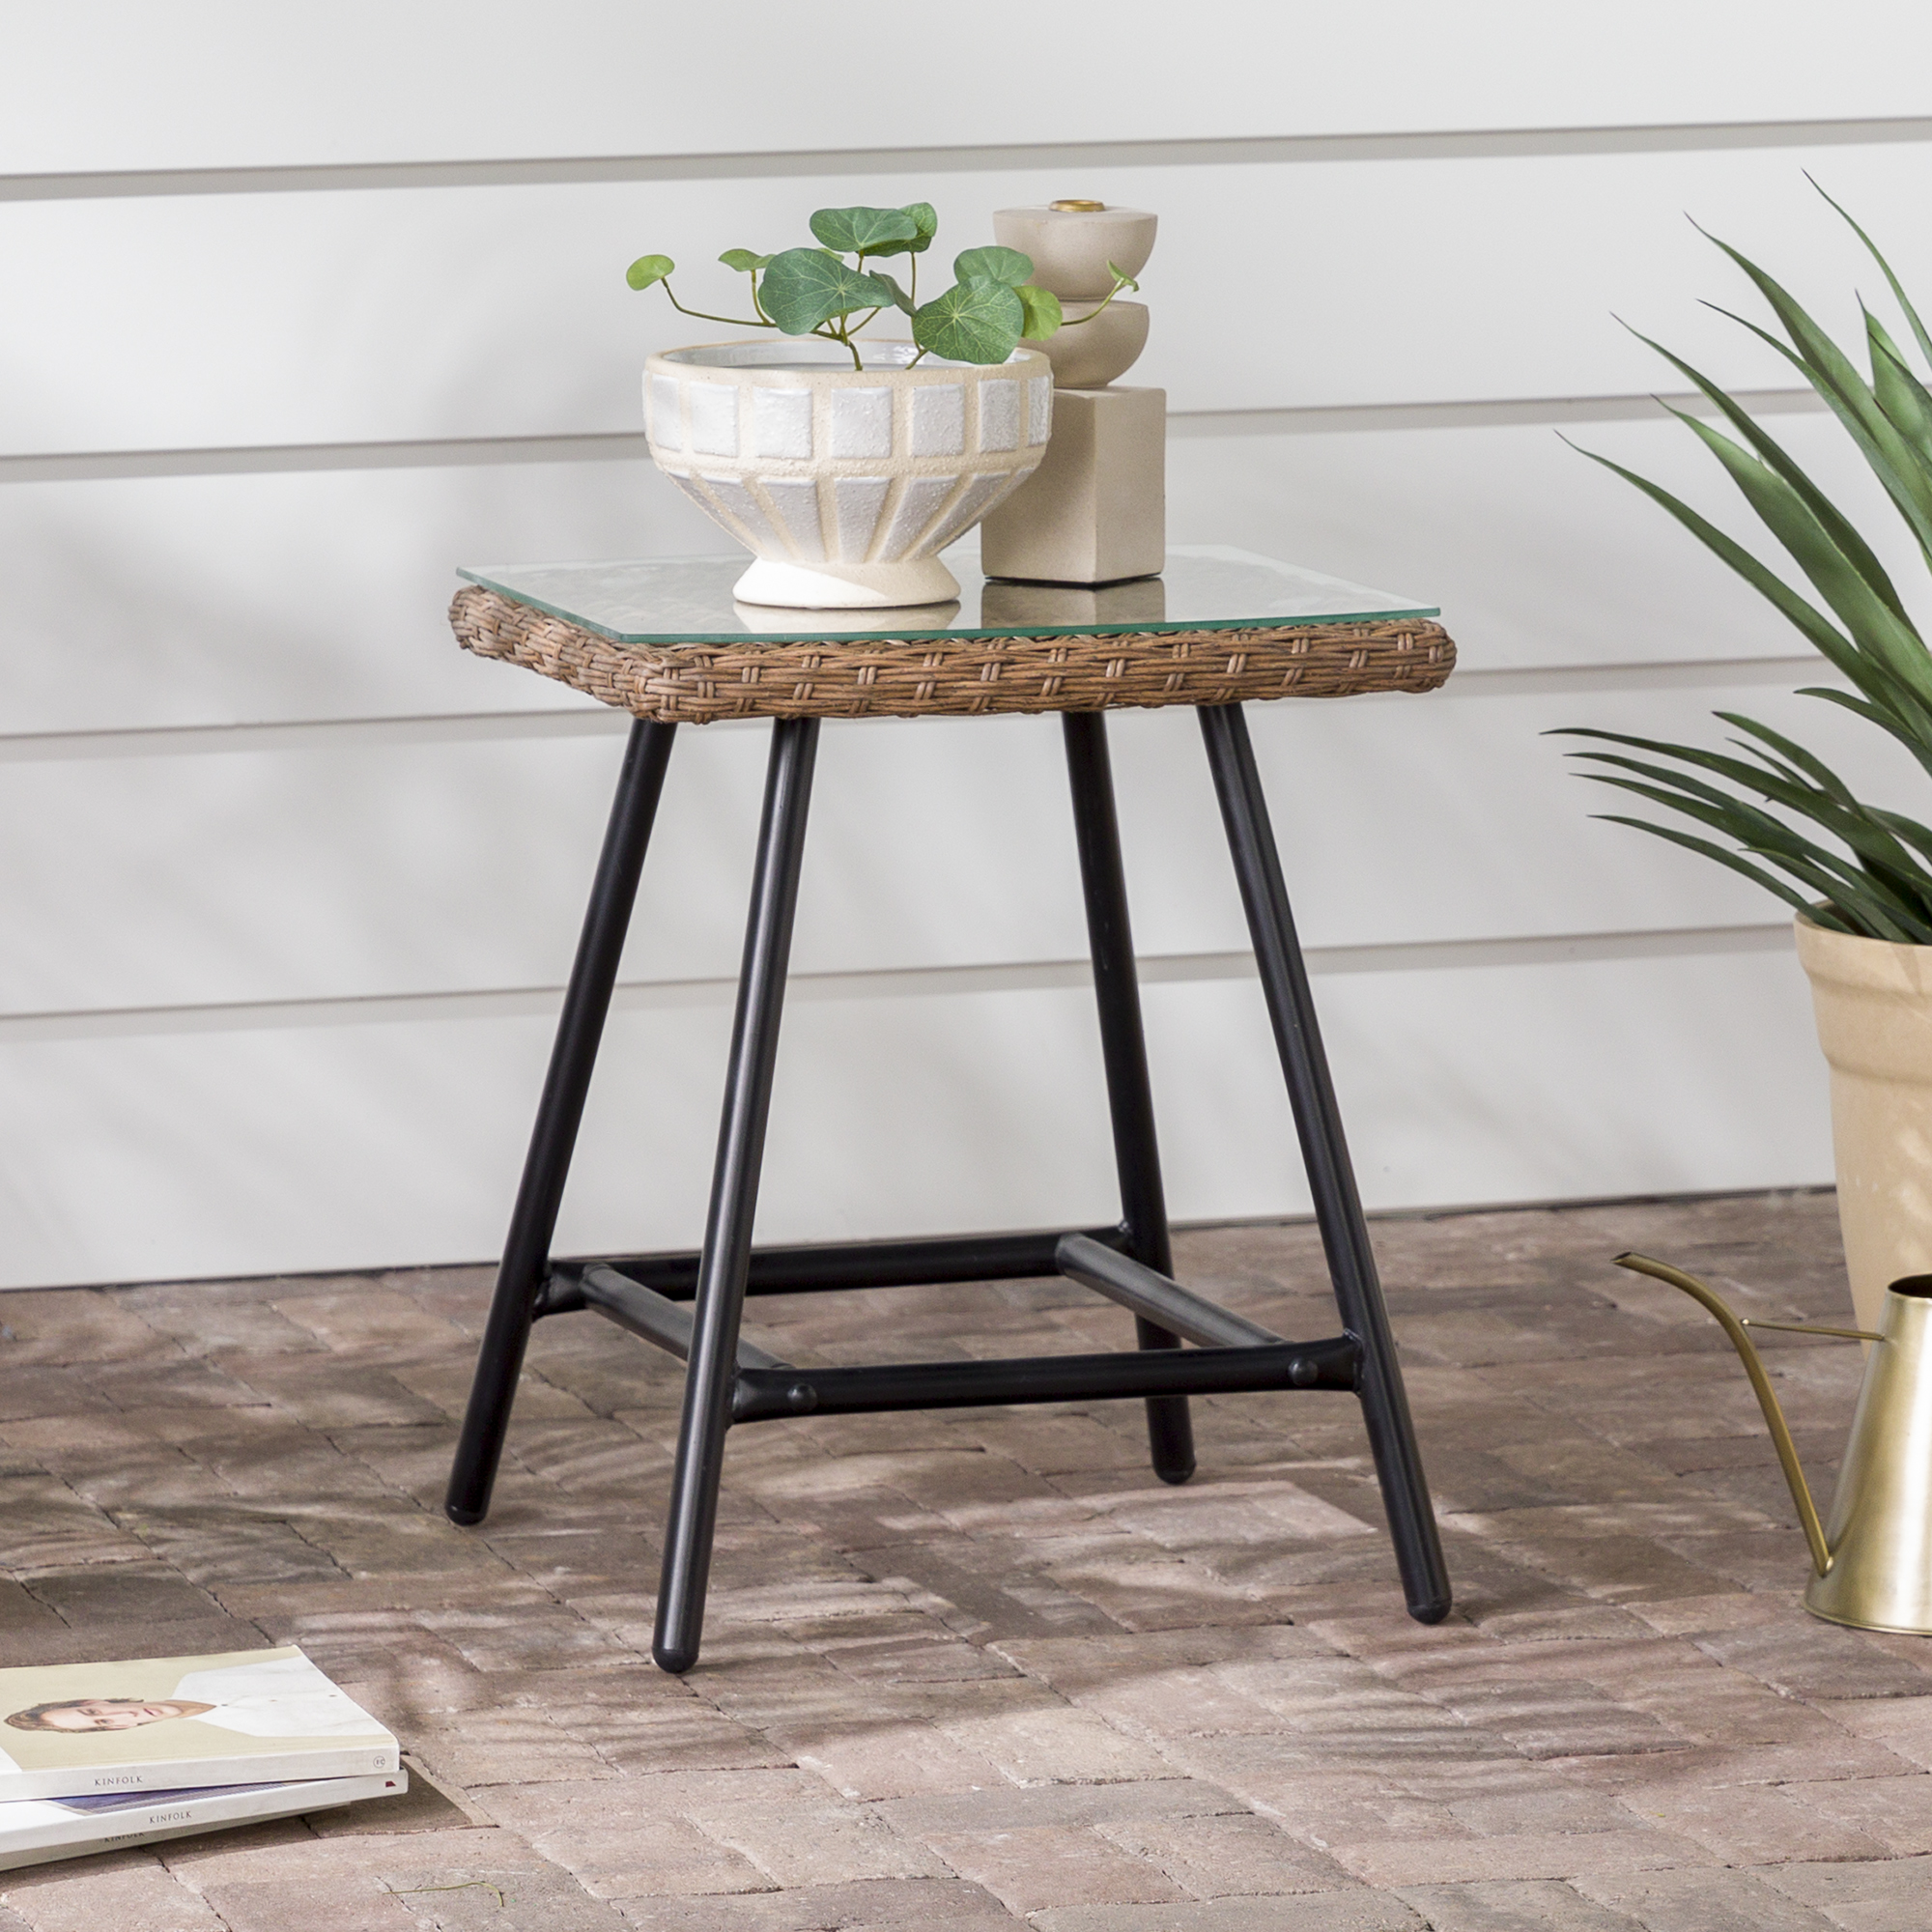 Walker Edison Transitional Patio Wood Side Table - Natural - image 1 of 20